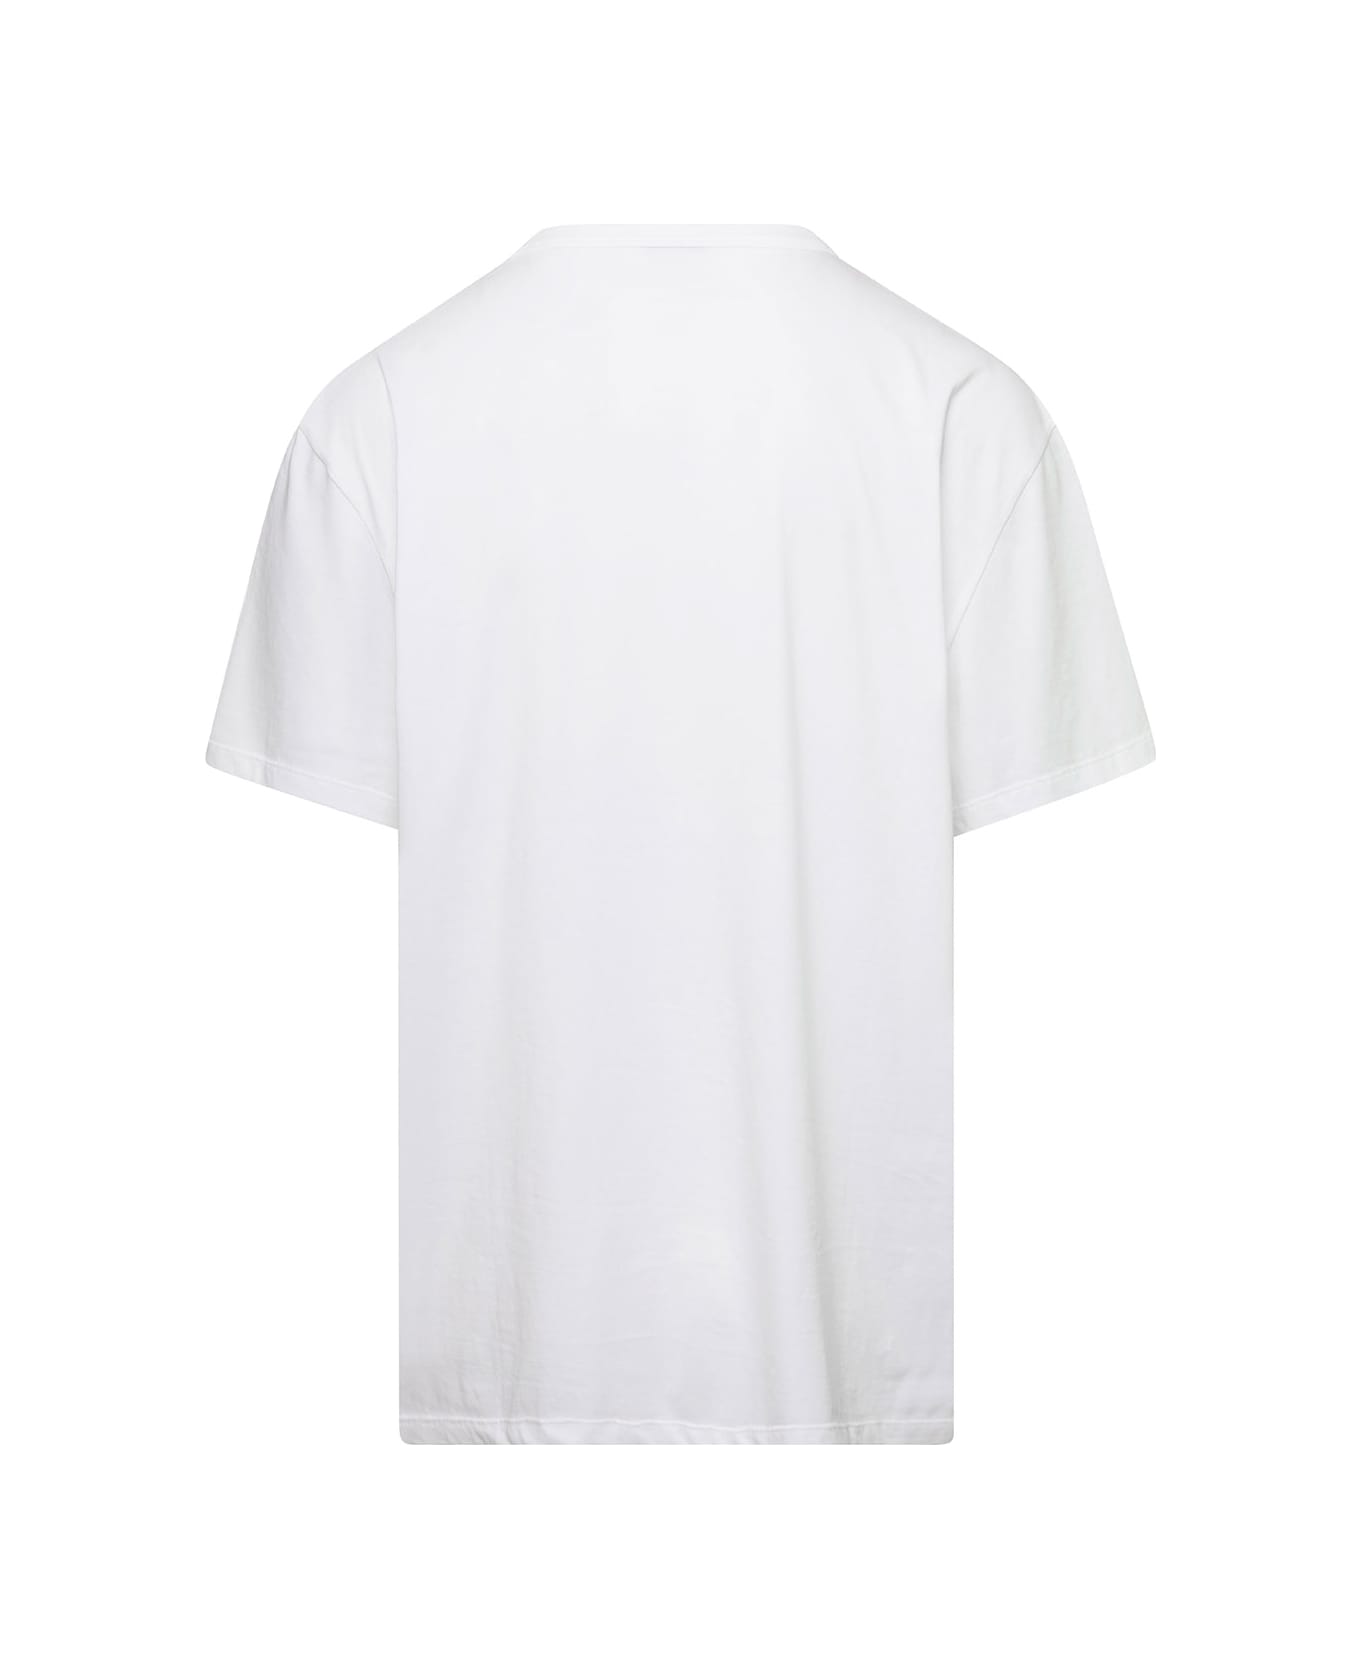 Alexander McQueen White Creneck T-shirt With Contrasting Logo Lettering Originals In Cotton Man - White